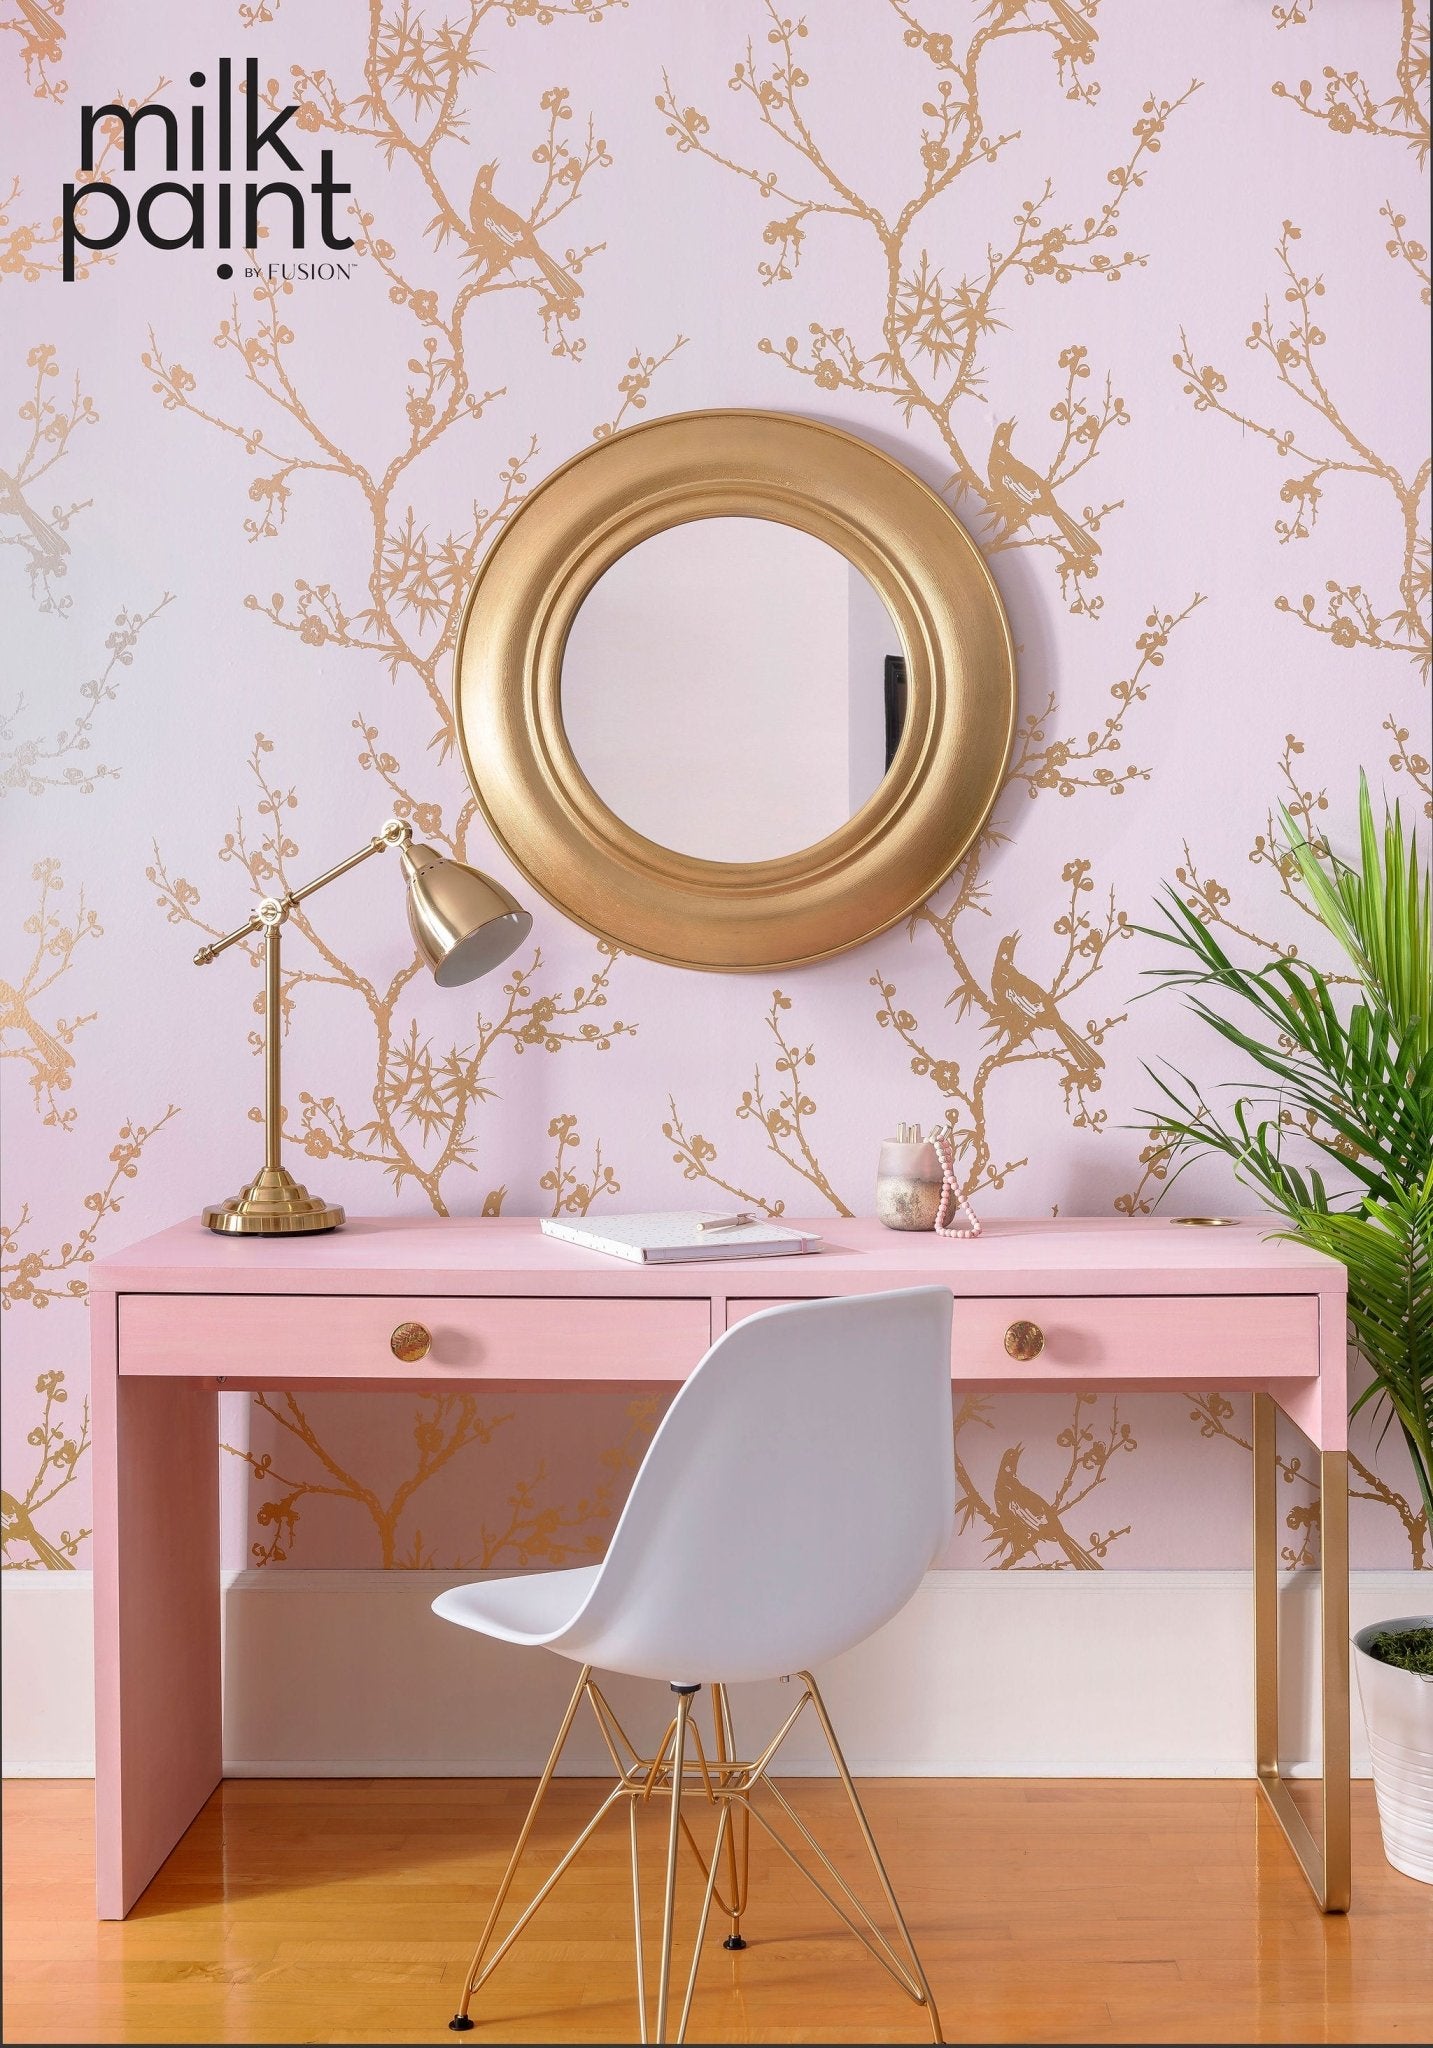 Milk Paint by Fusion - Millennial Pink - Rustic River Home